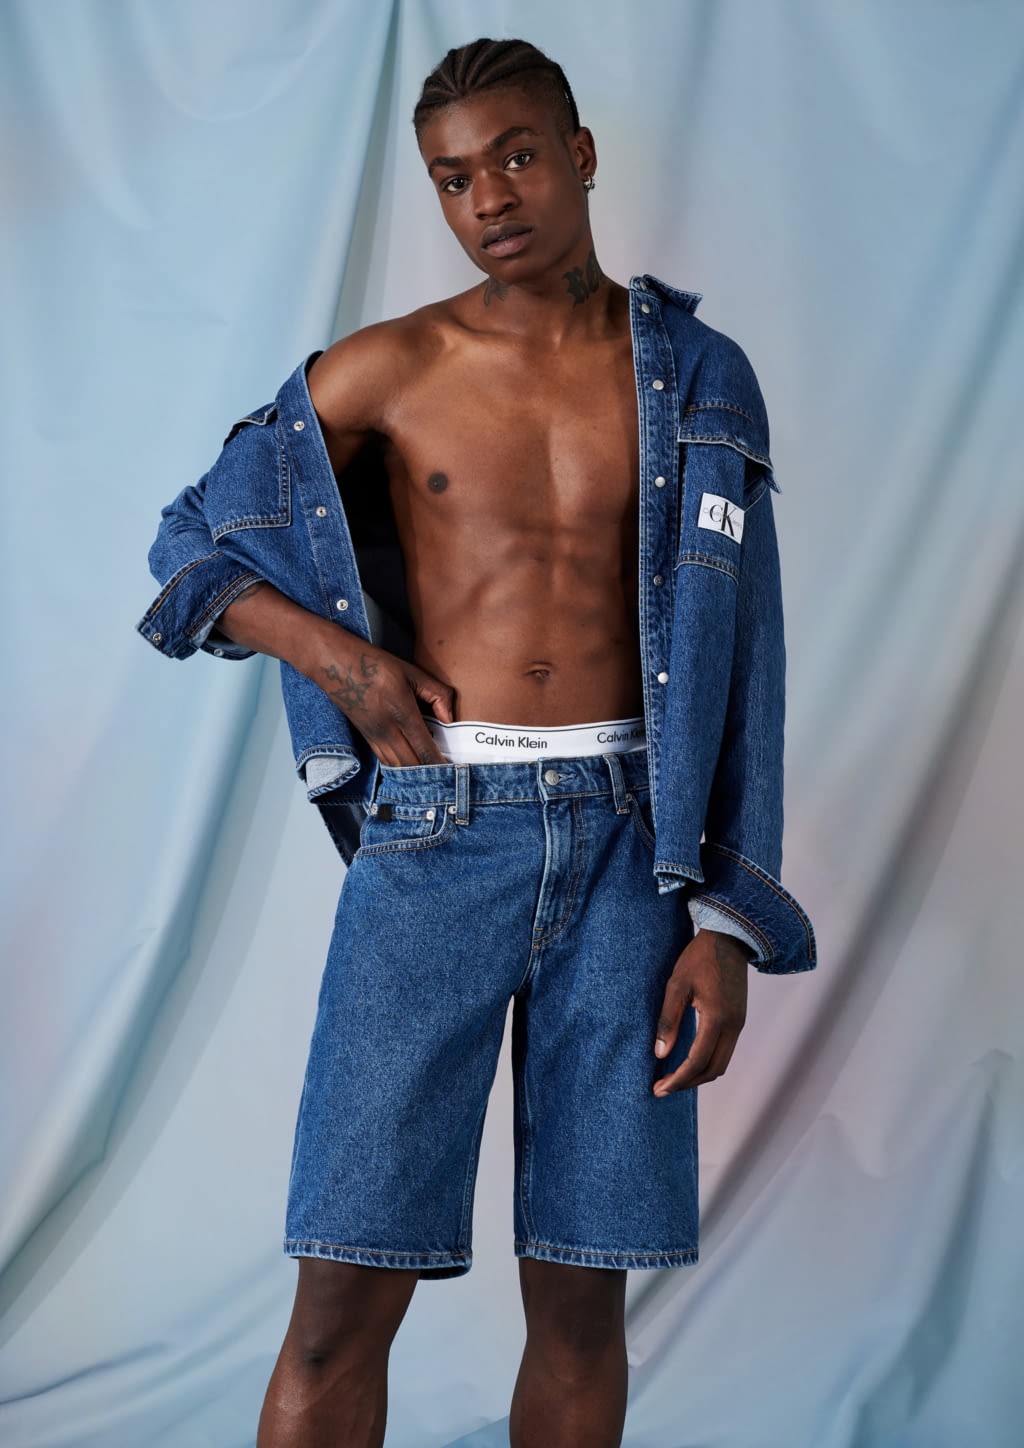 Calvin Klein Jeans, Brands of the World™